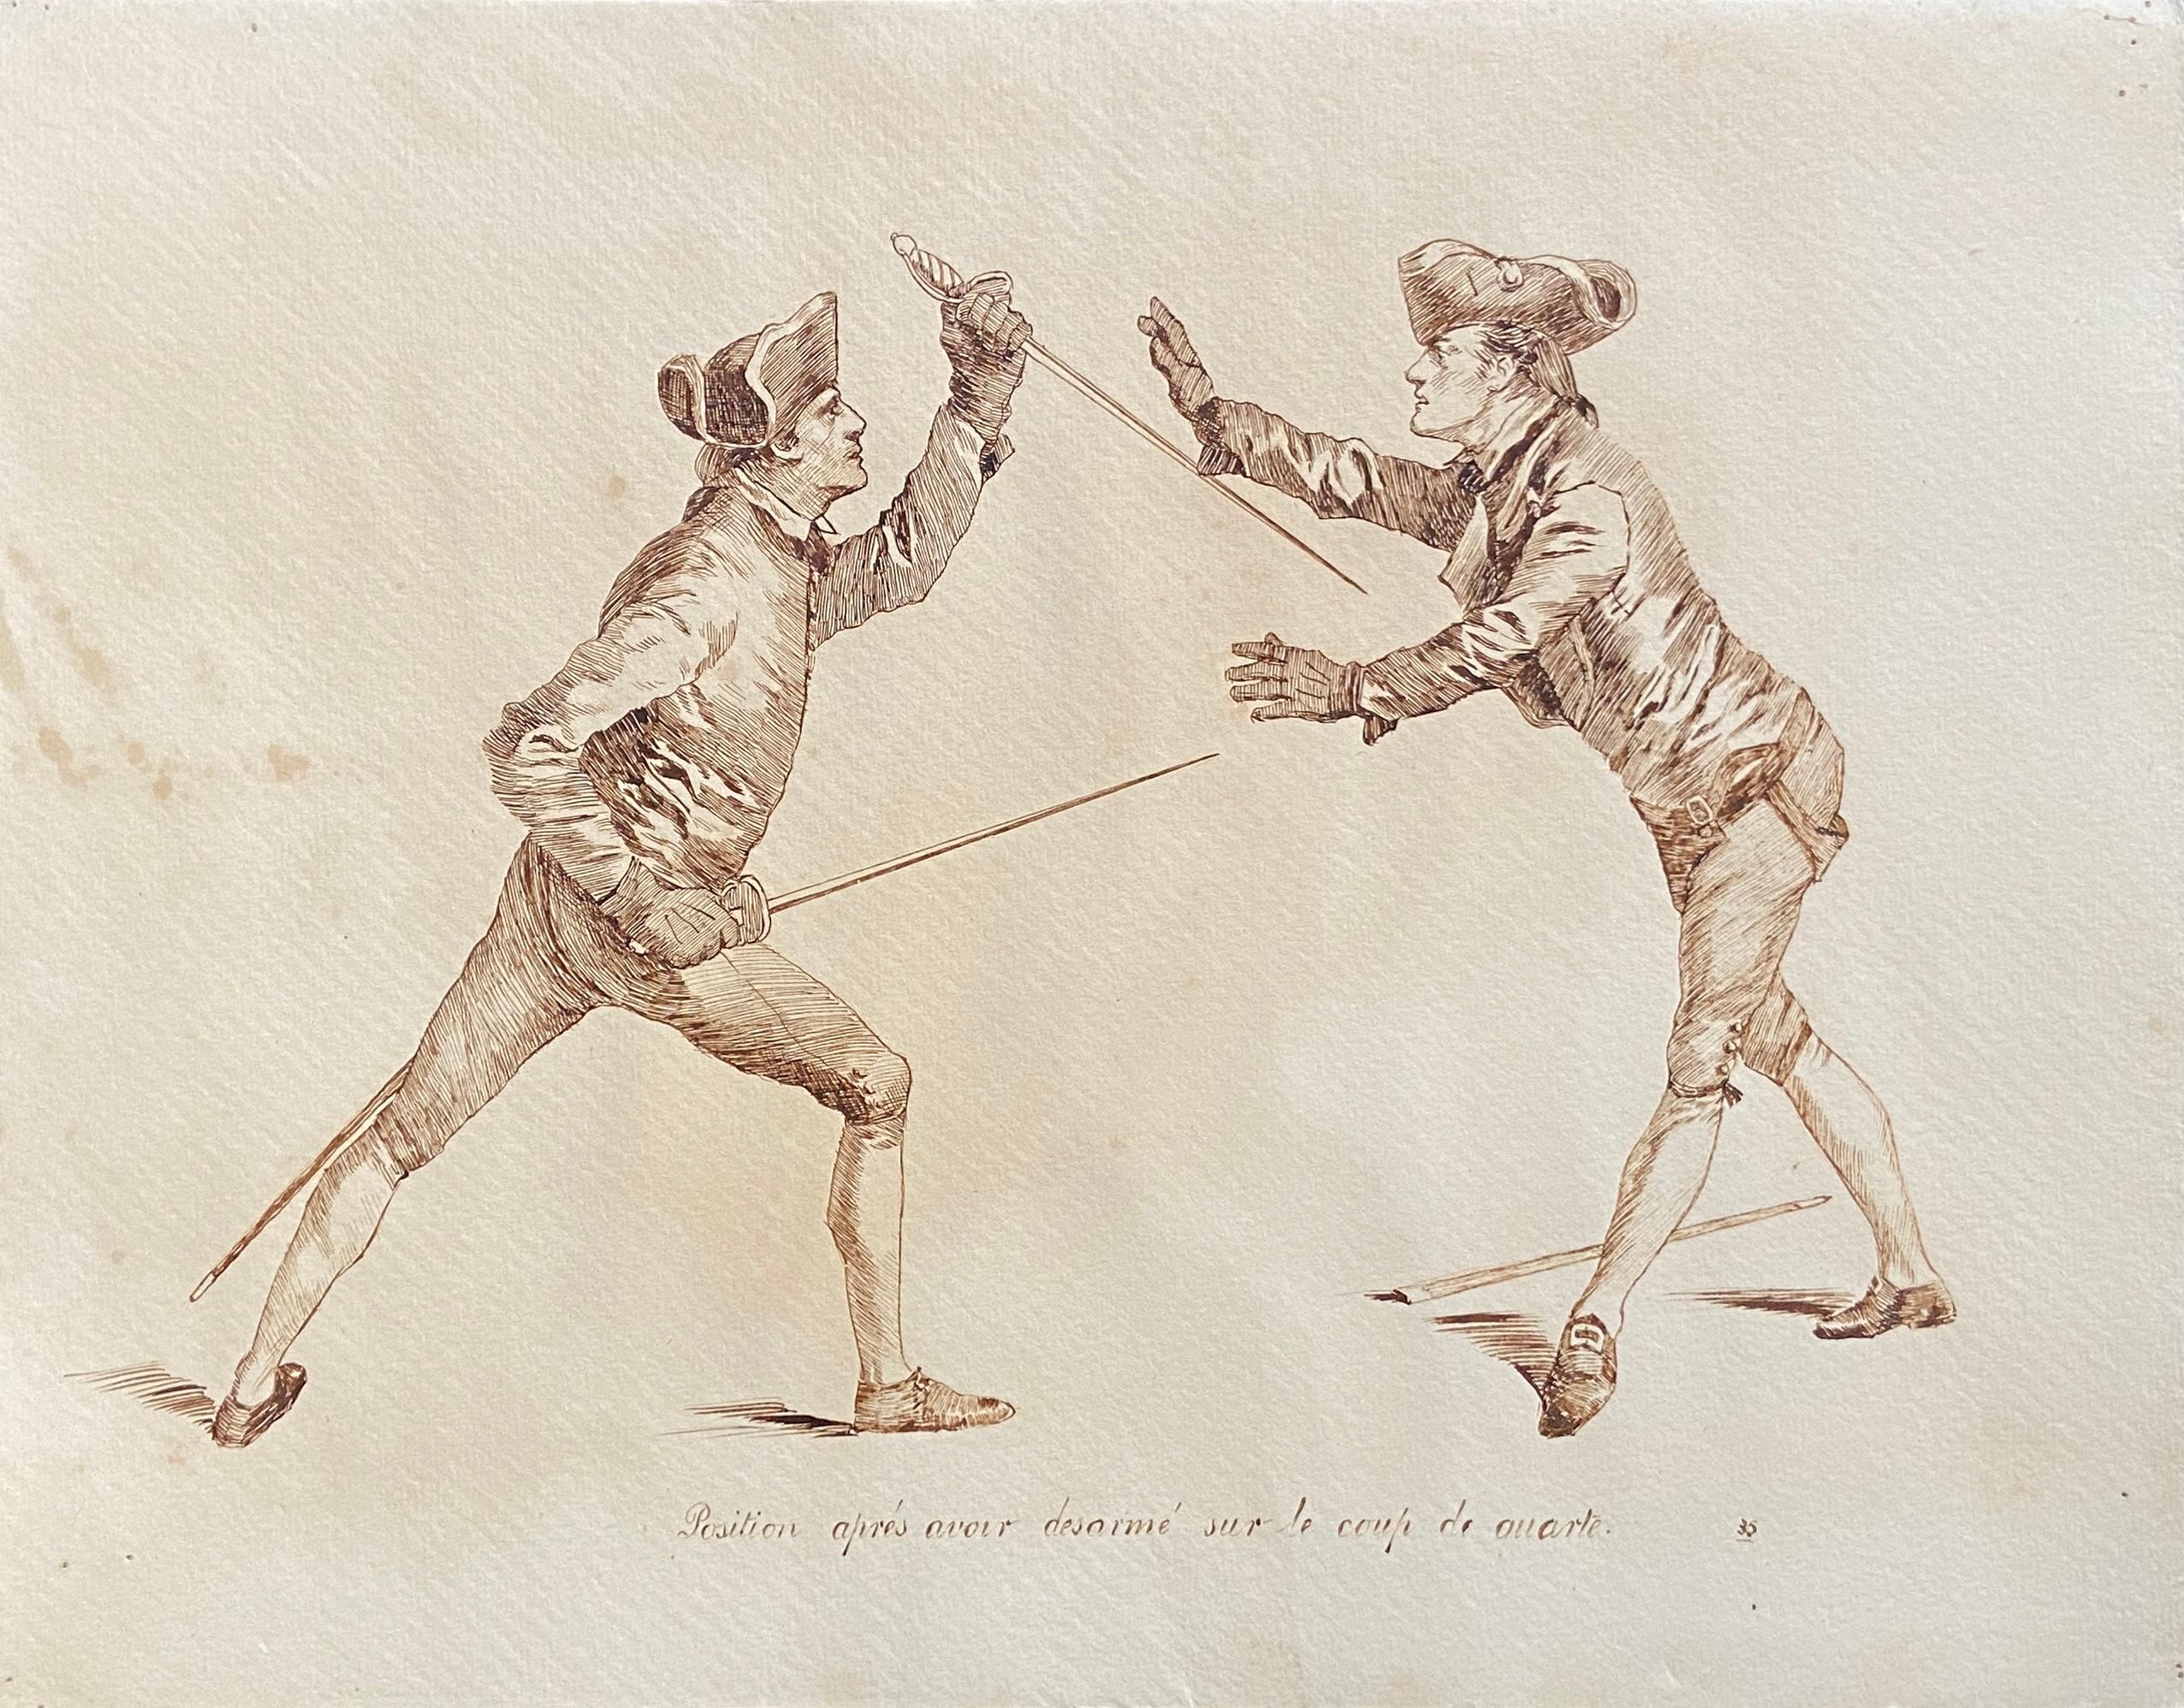 20th Century French School Figurative Art - The School of Arms, Pen and Ink Fencing Drawings, c.1920s French